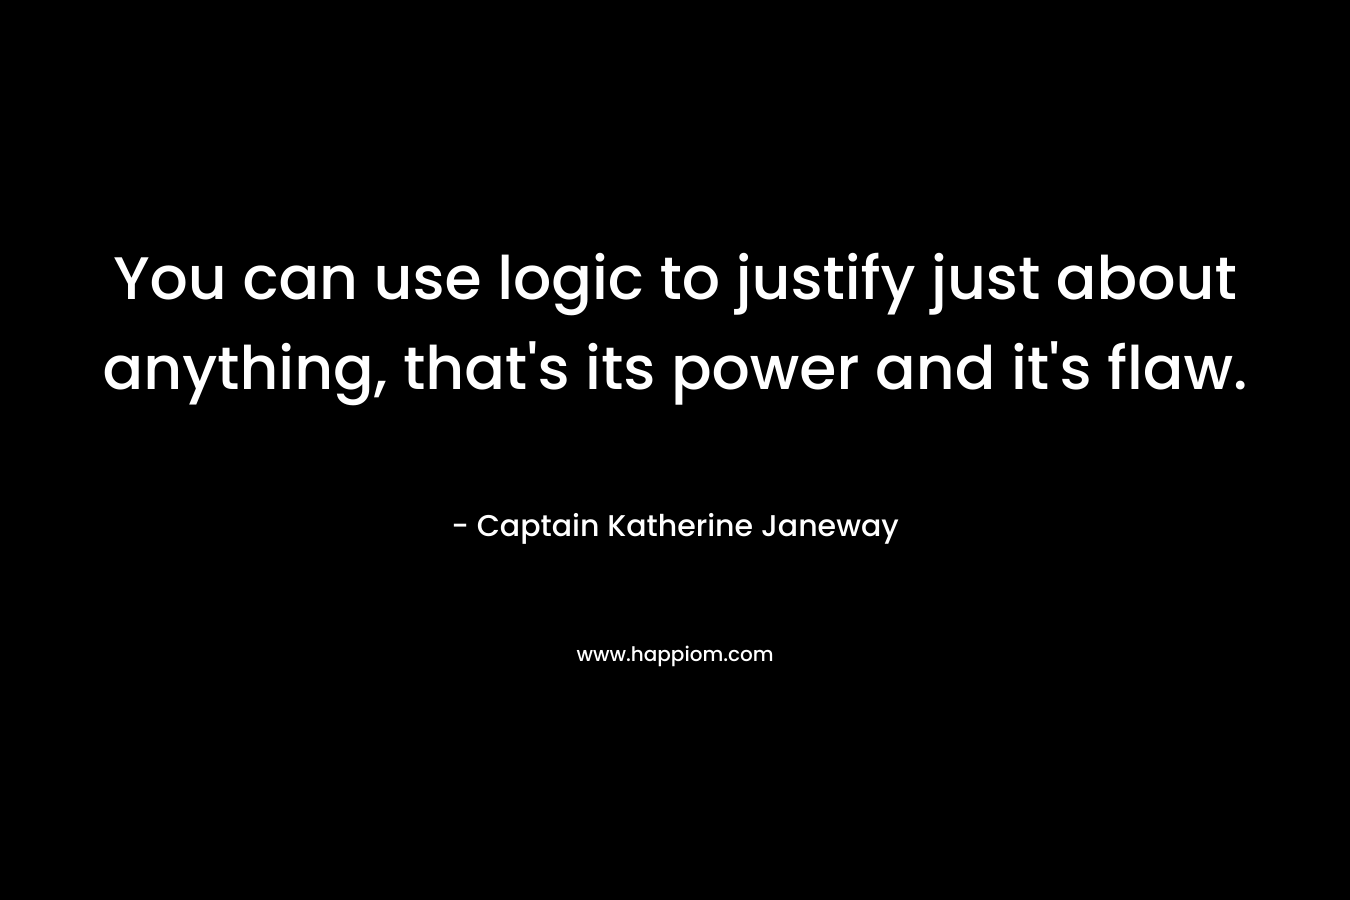 You can use logic to justify just about anything, that's its power and it's flaw.